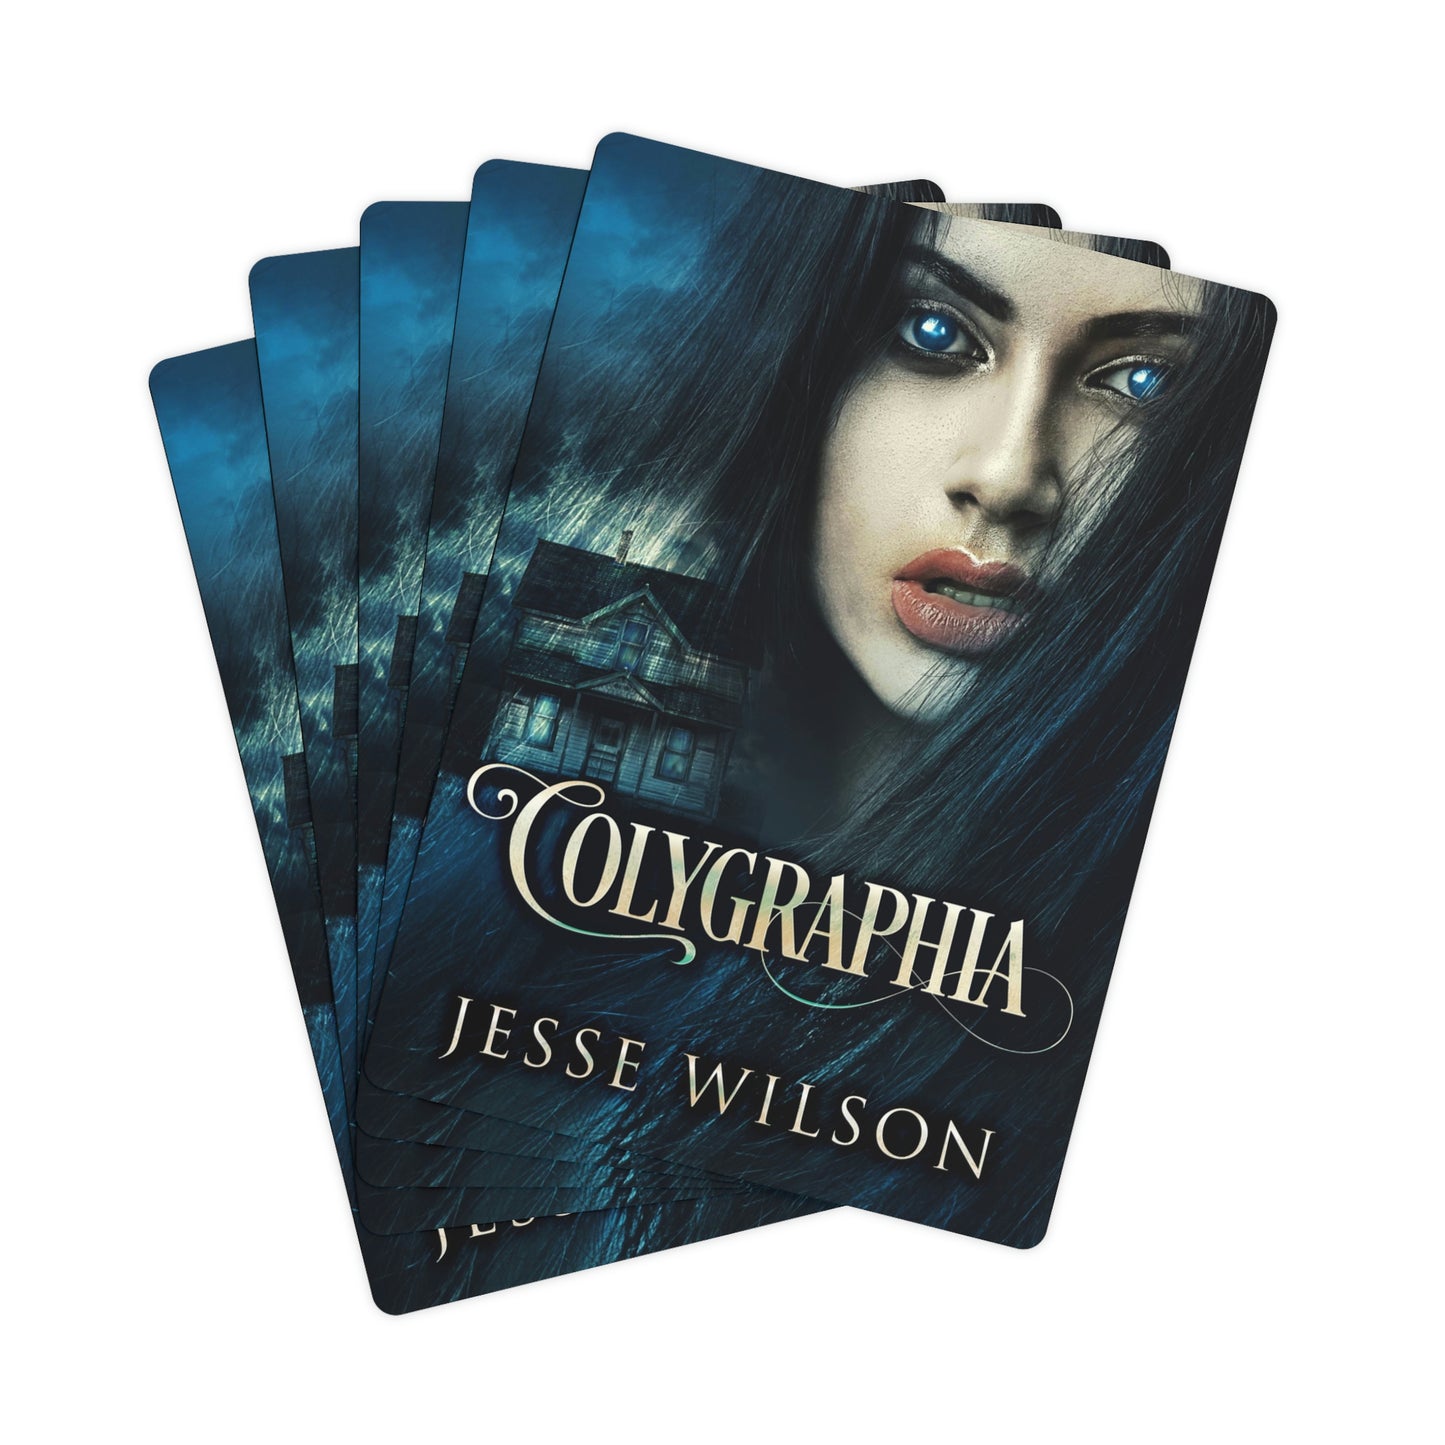 Colygraphia - Playing Cards